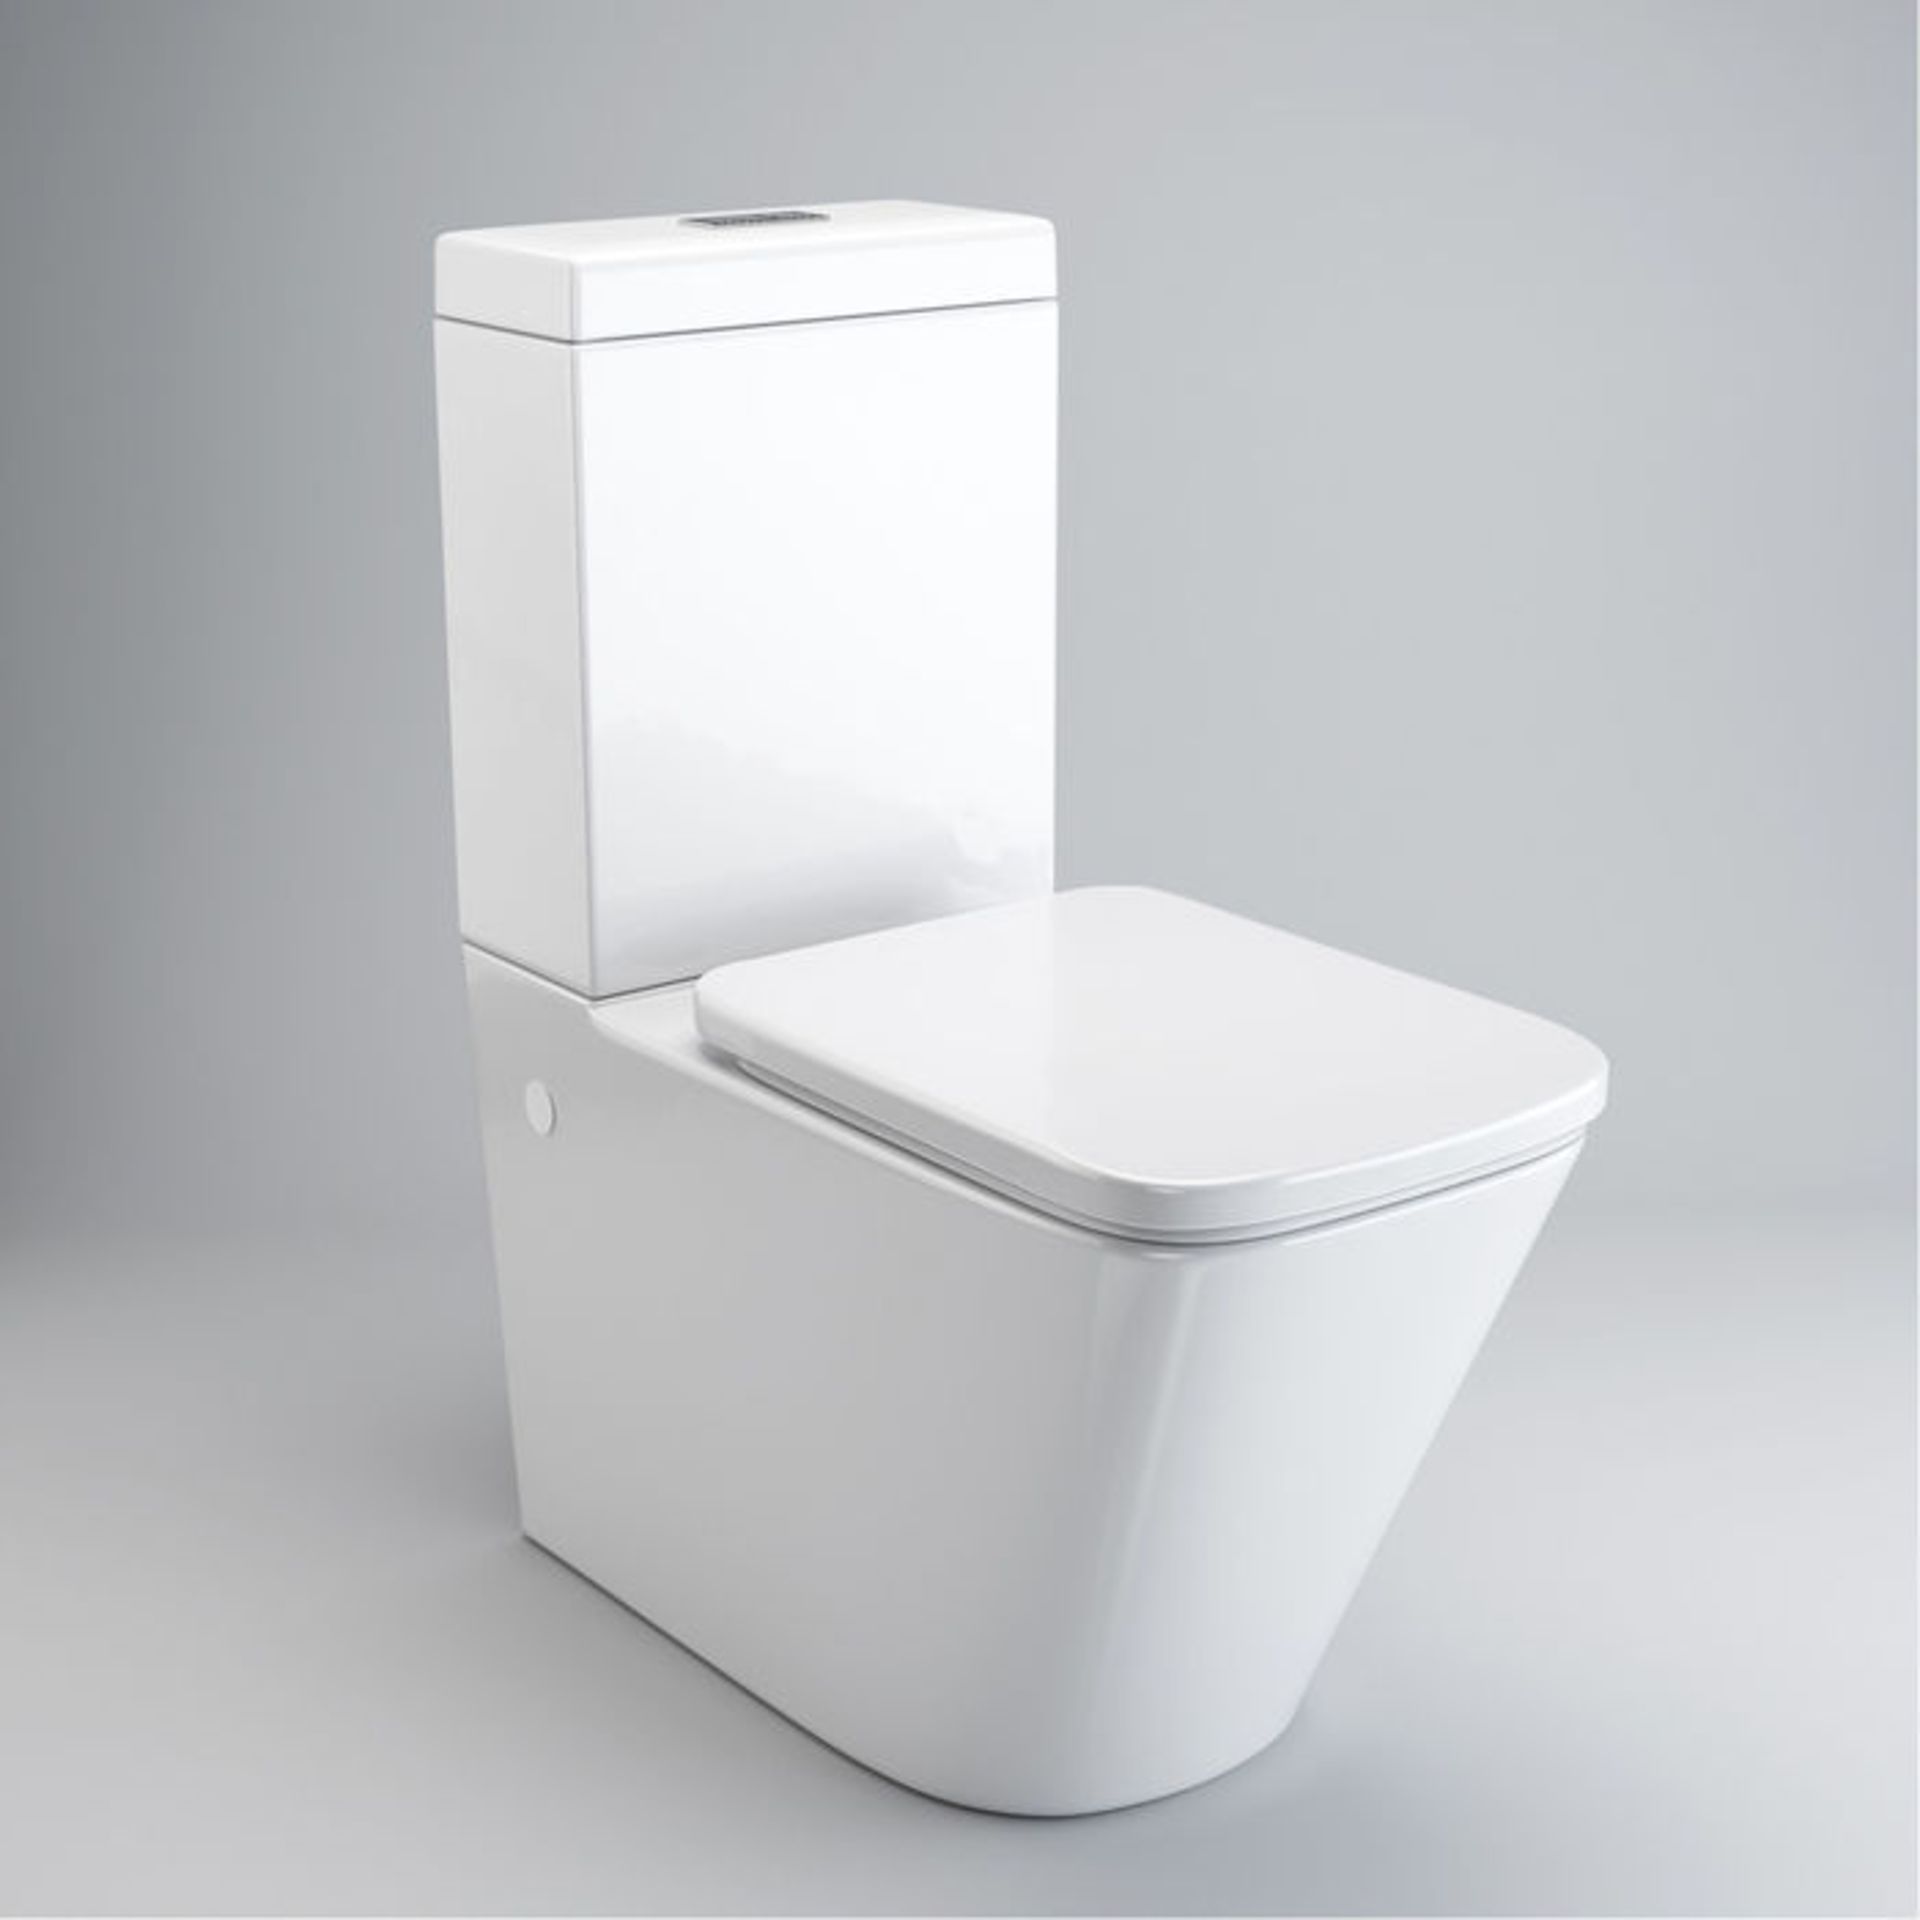 (P254) Florence Close Coupled Toilet & Cistern inc Soft Close Seat. Contemporary design finished - Image 4 of 5